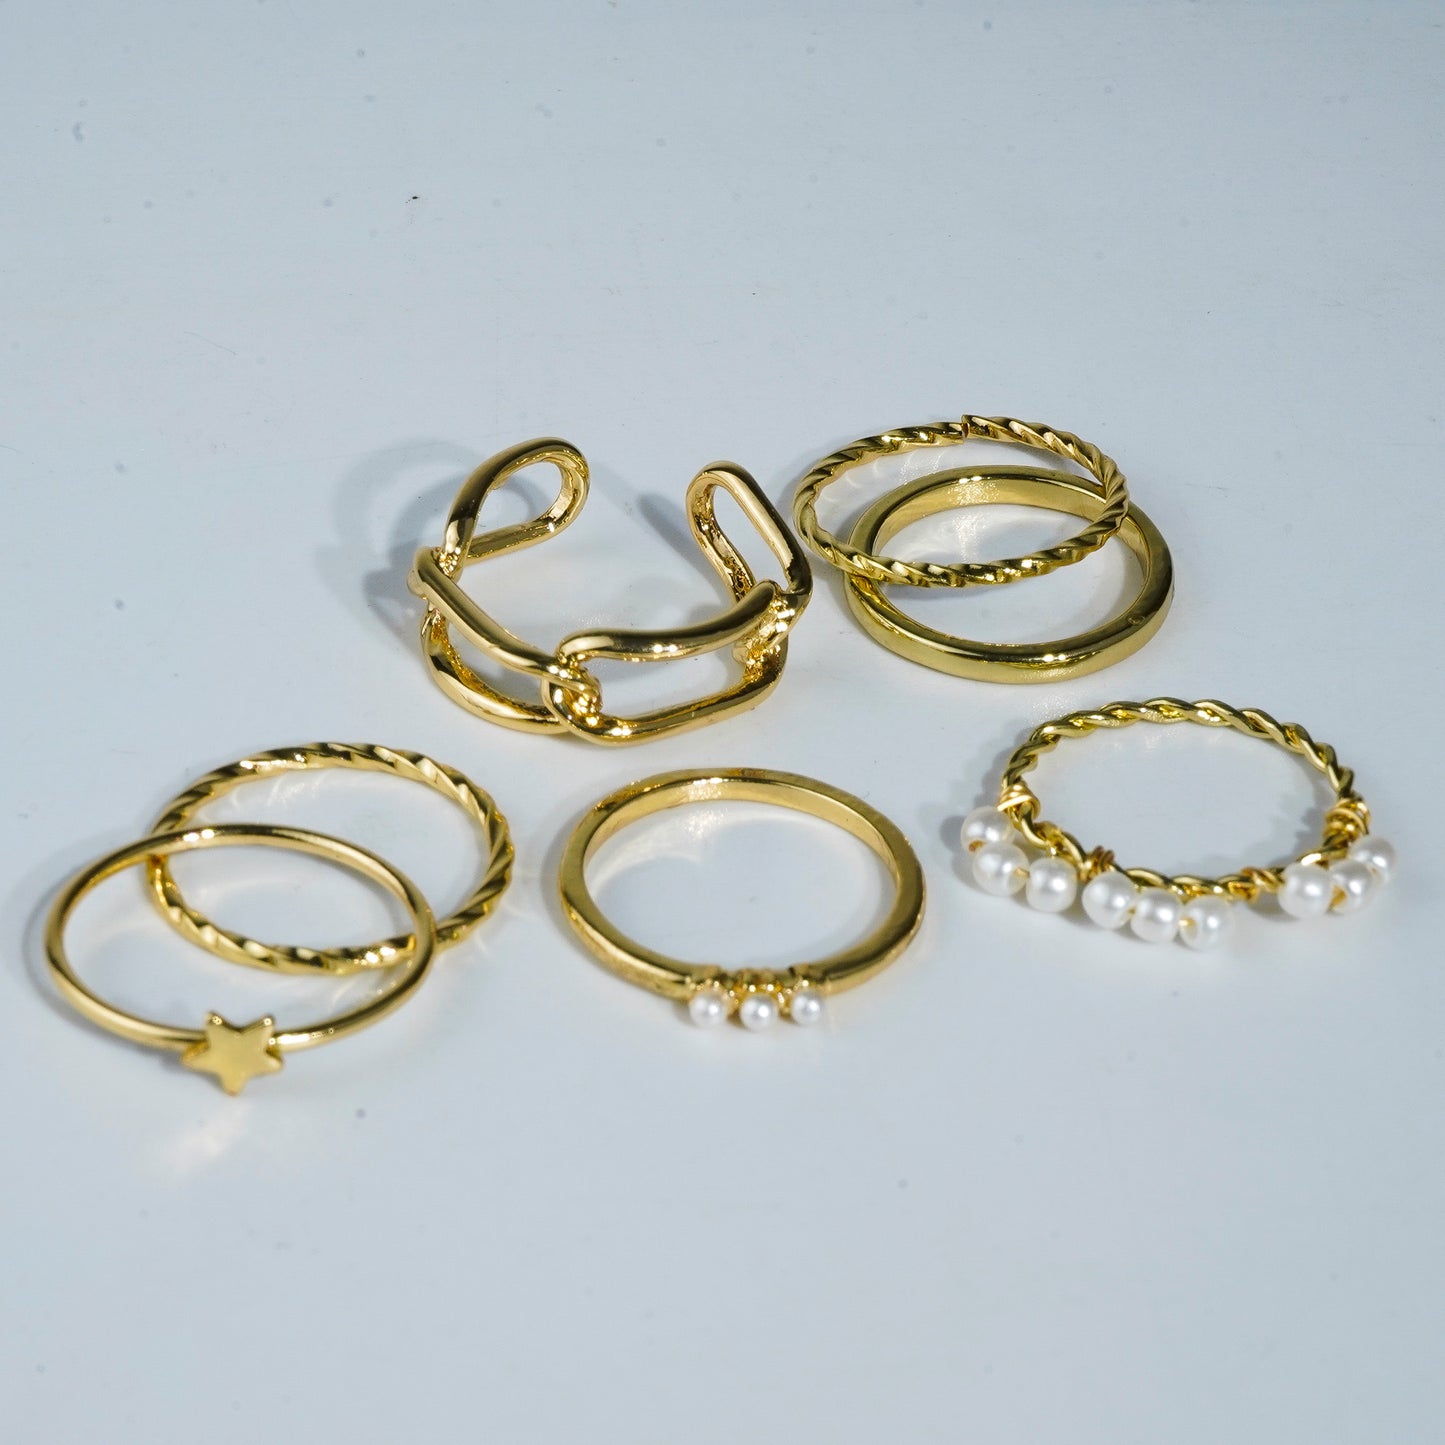 Trendy Set Ring For Fashionable Women(Code:R32)